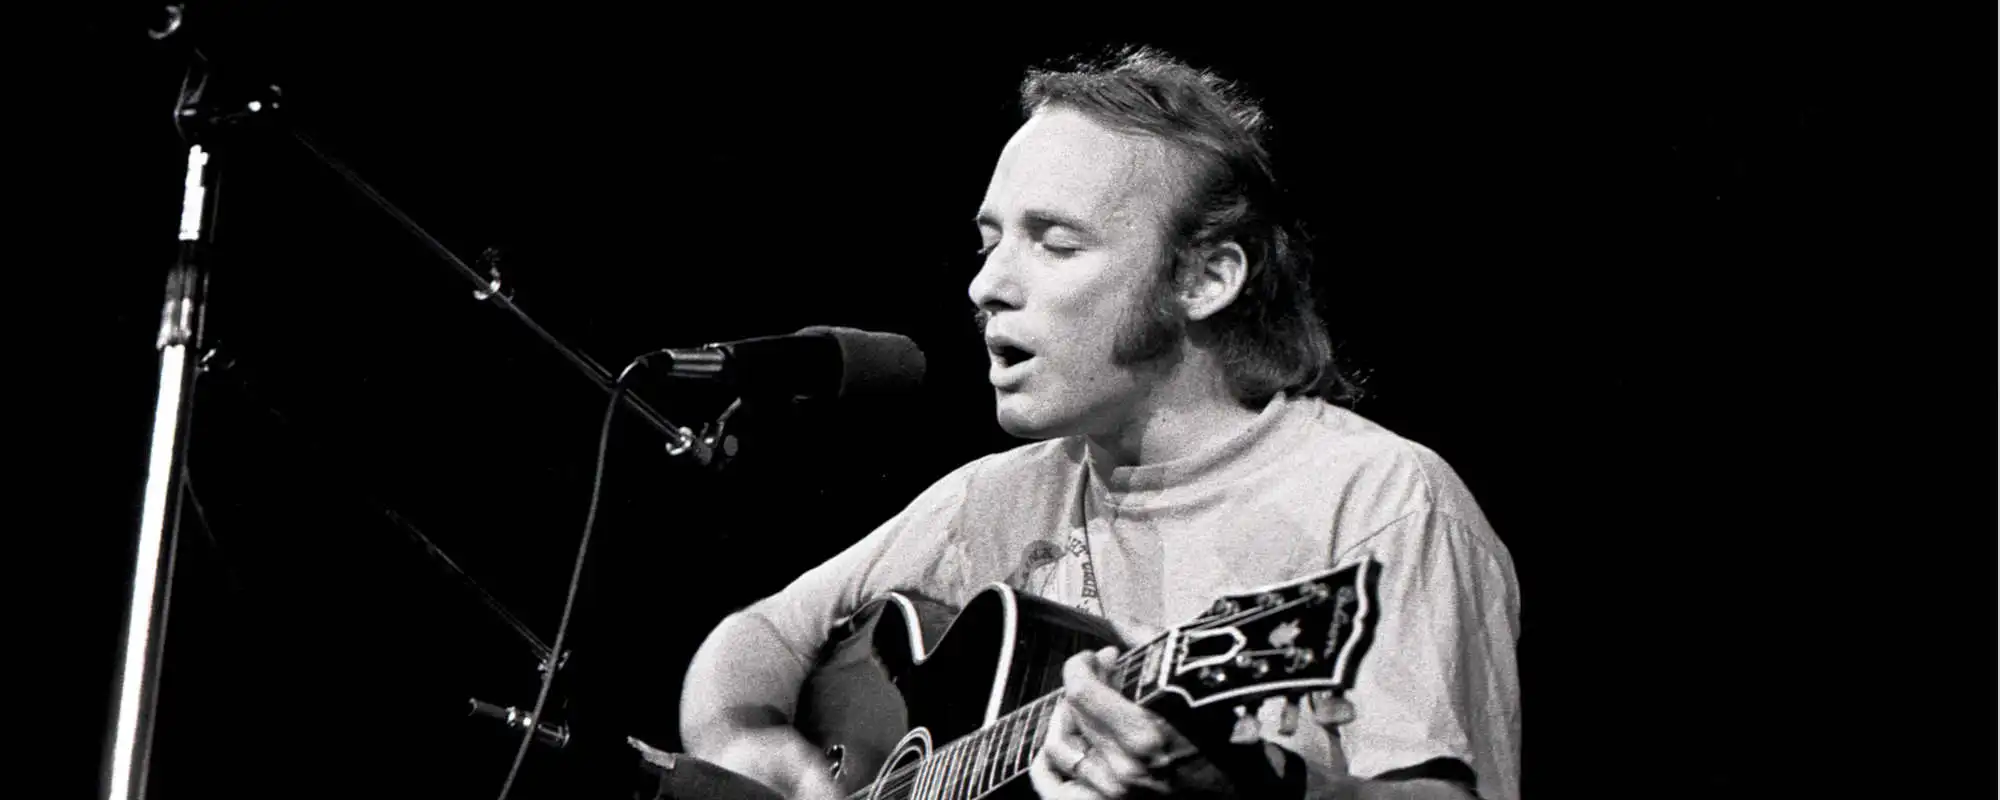 Review: Stephen Stills’ First Solo Tour Gets an Overdue Release